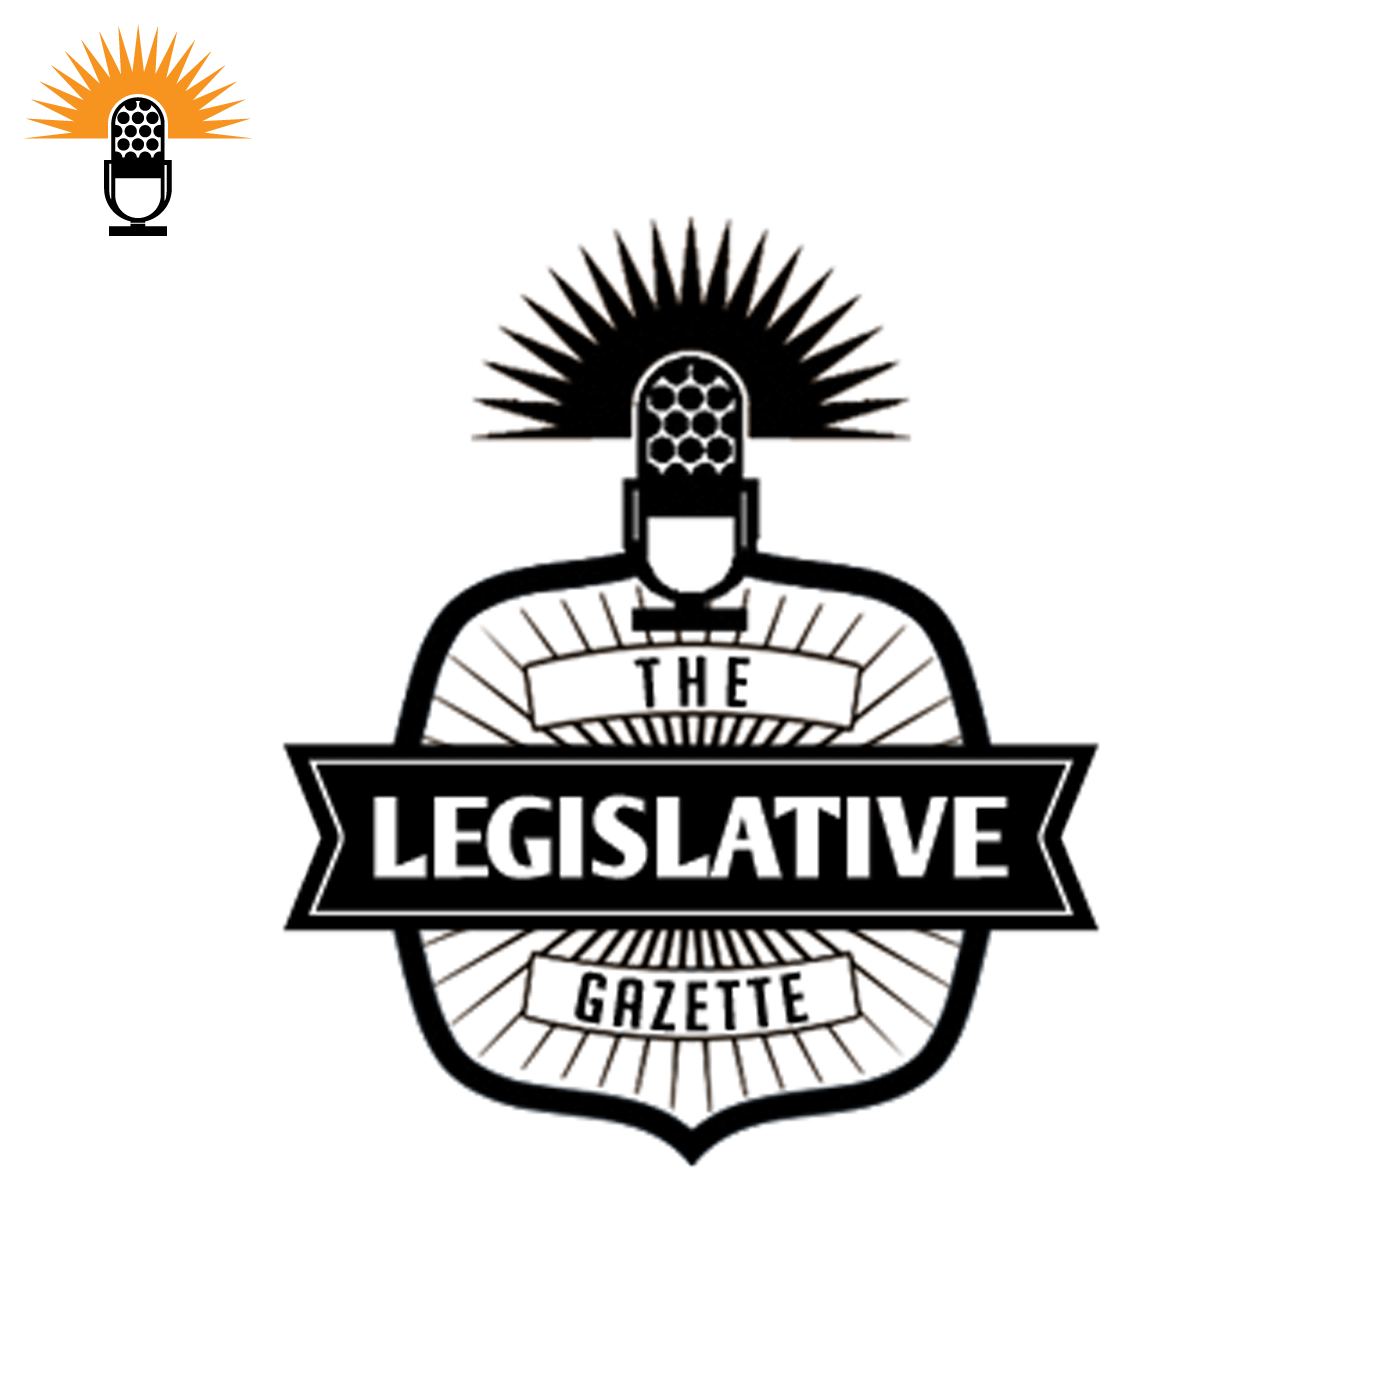 The Legislative Gazette - we’ll take a look back at NYS government and politics in 2023